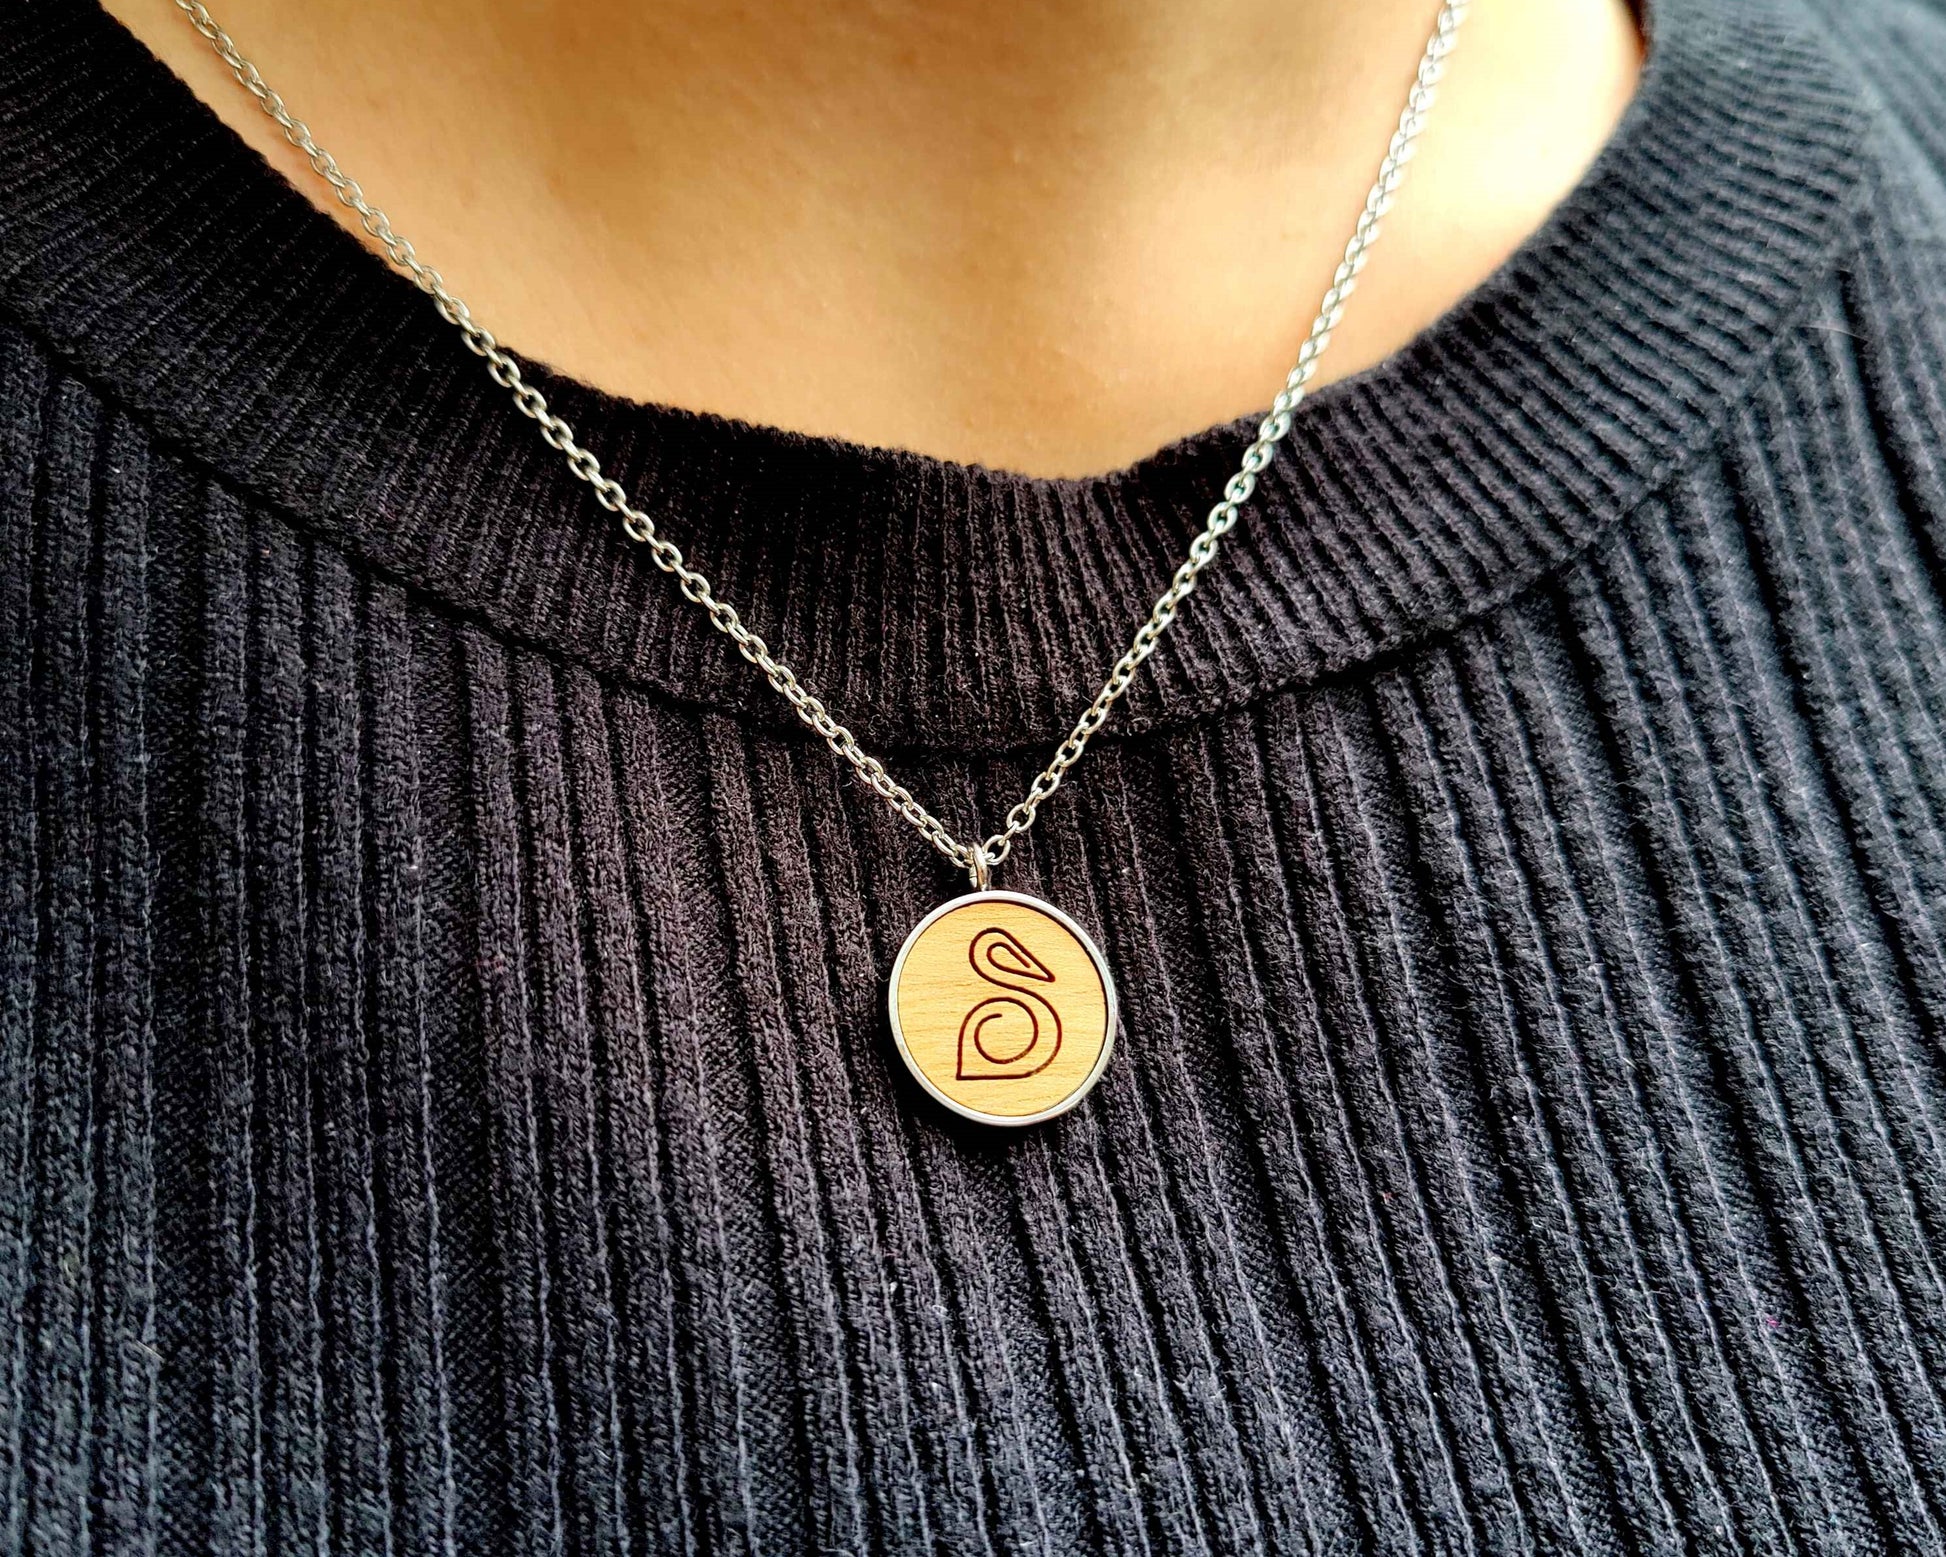 Nut wood pelican pendant necklace with stainless steel chain.  All our eco-friendly necklaces are delivered in FSC certified jewelry boxes with sustainable foam.